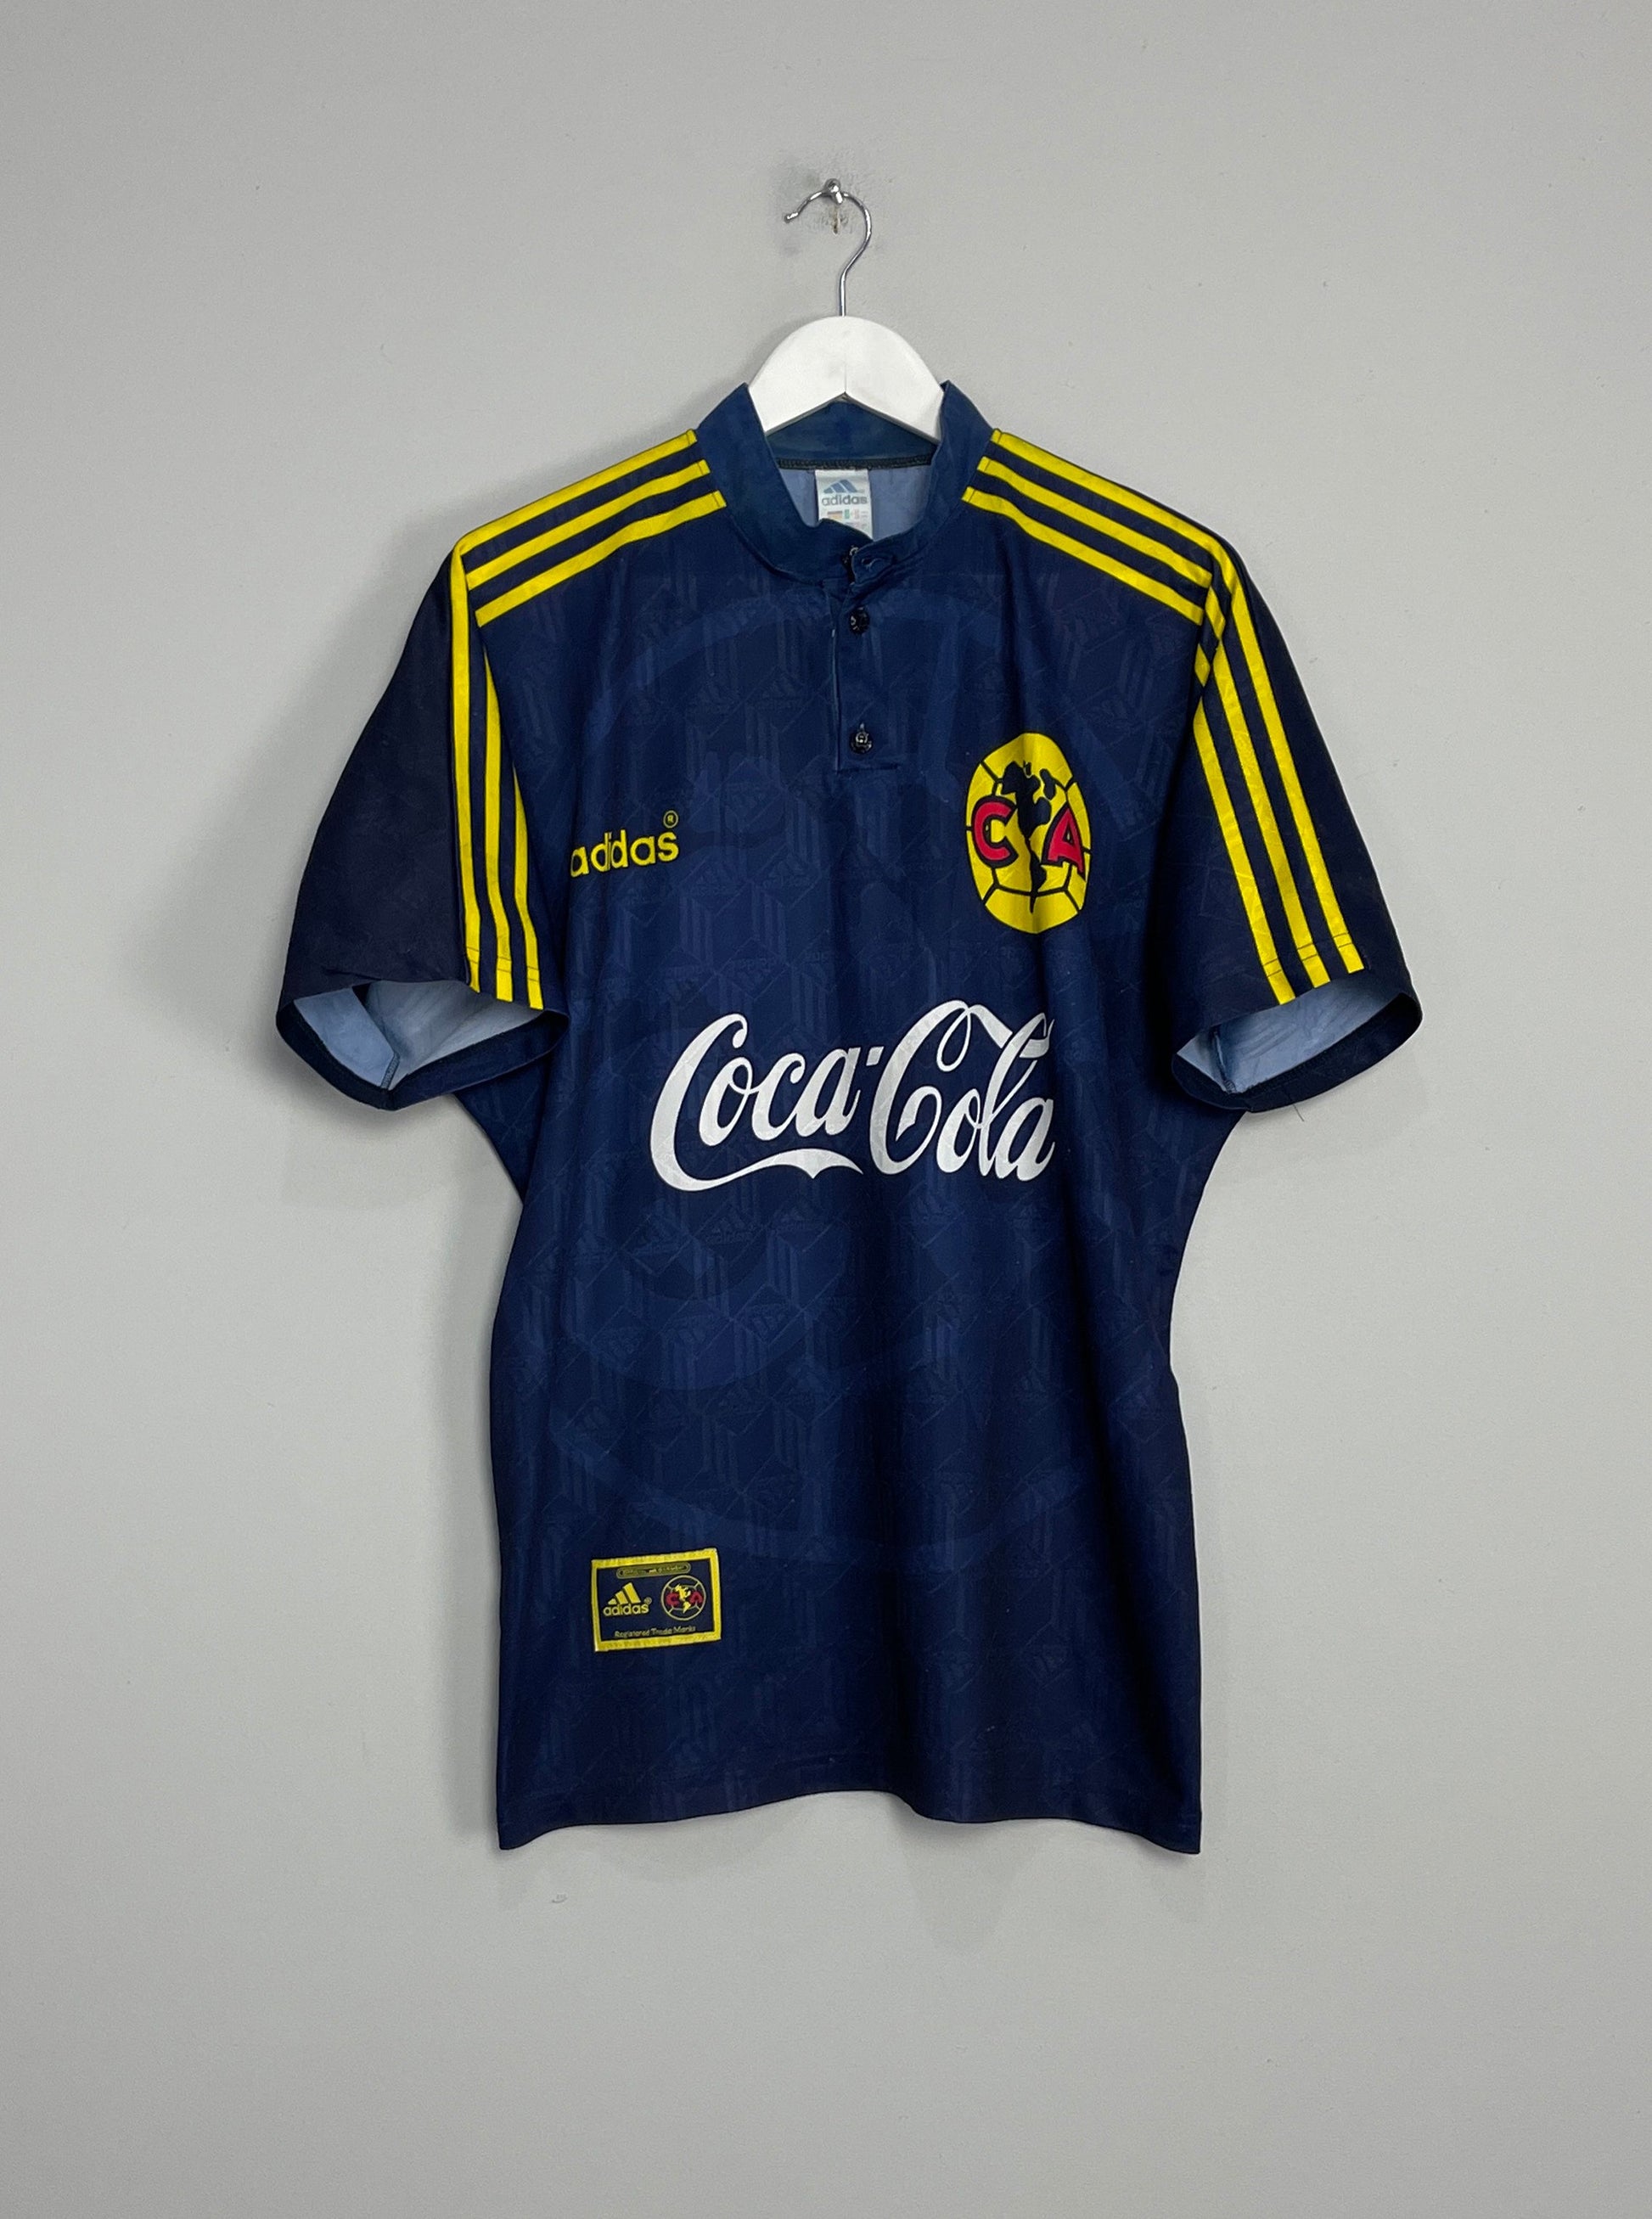 Image of the Club America shirt from the 1996/98 season